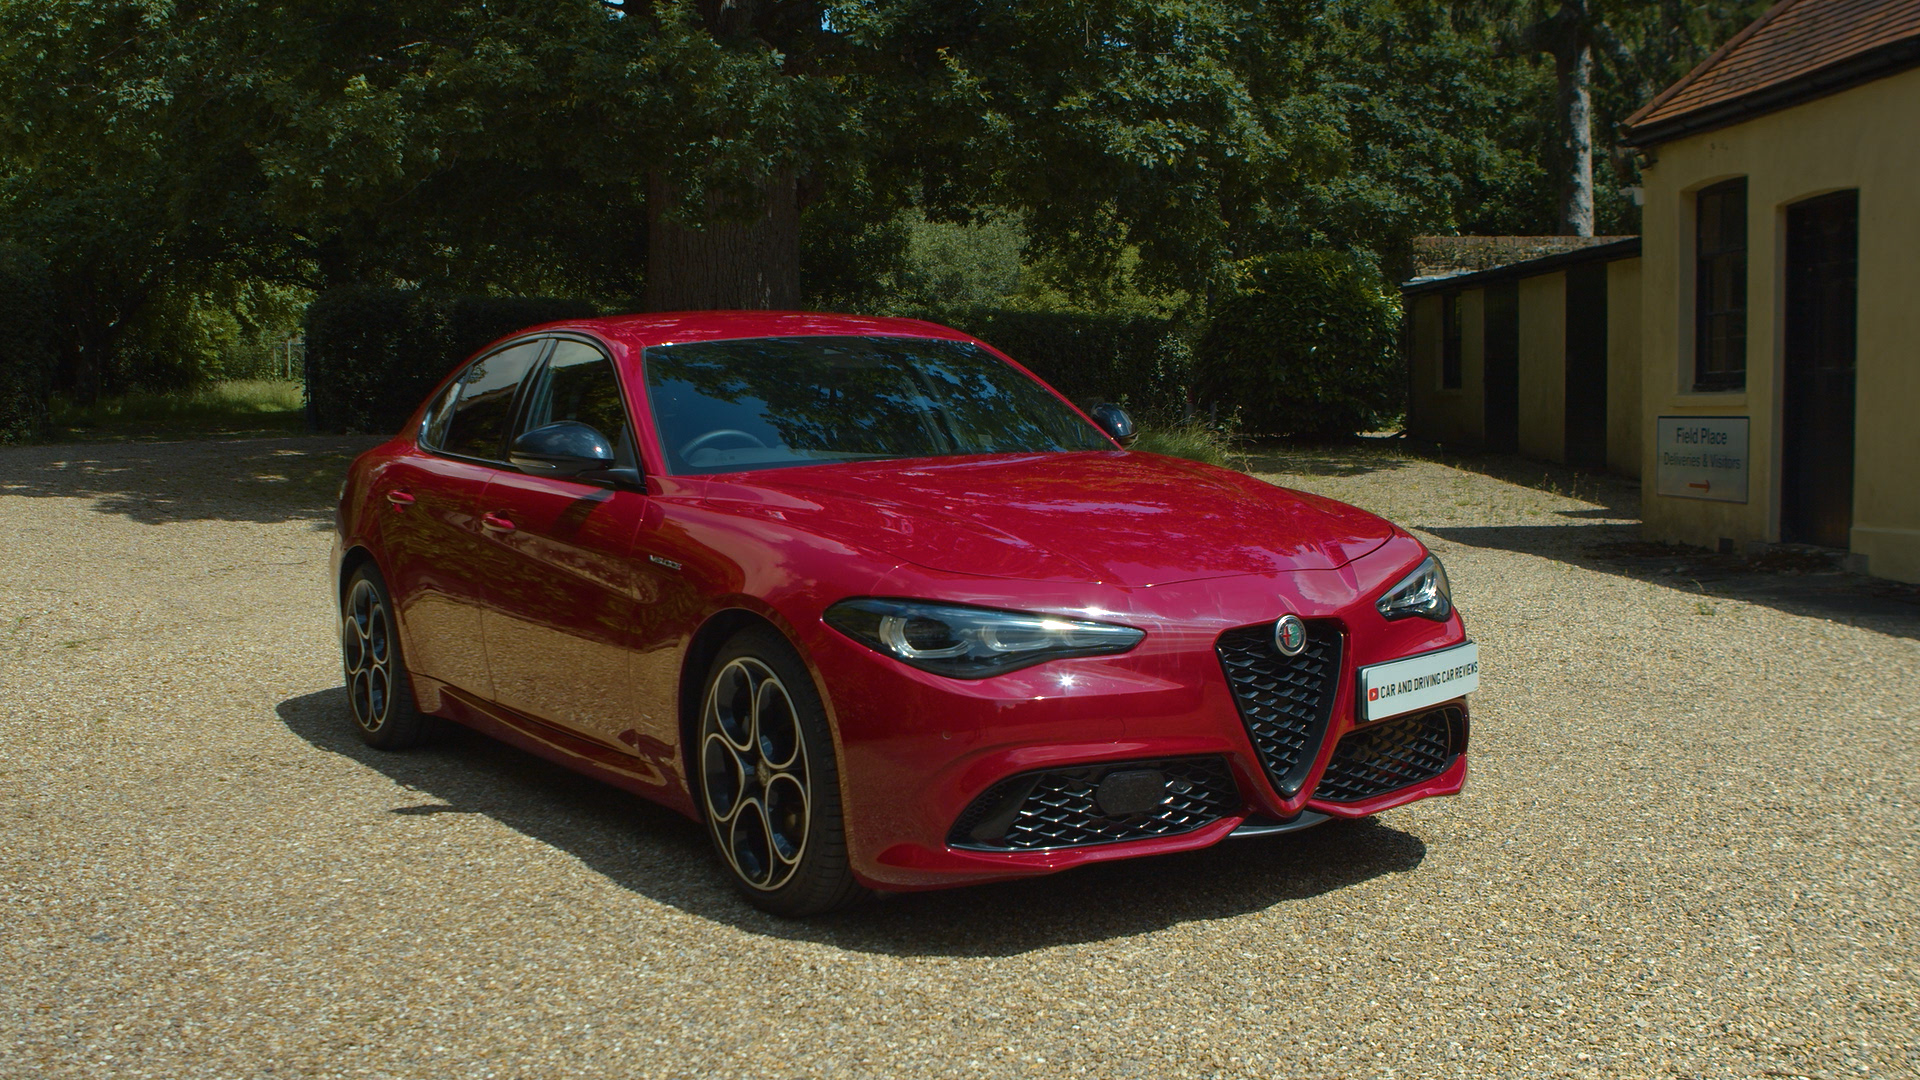 My favorite designs: Alfa Romeo 159, by Let's Talk About Cars